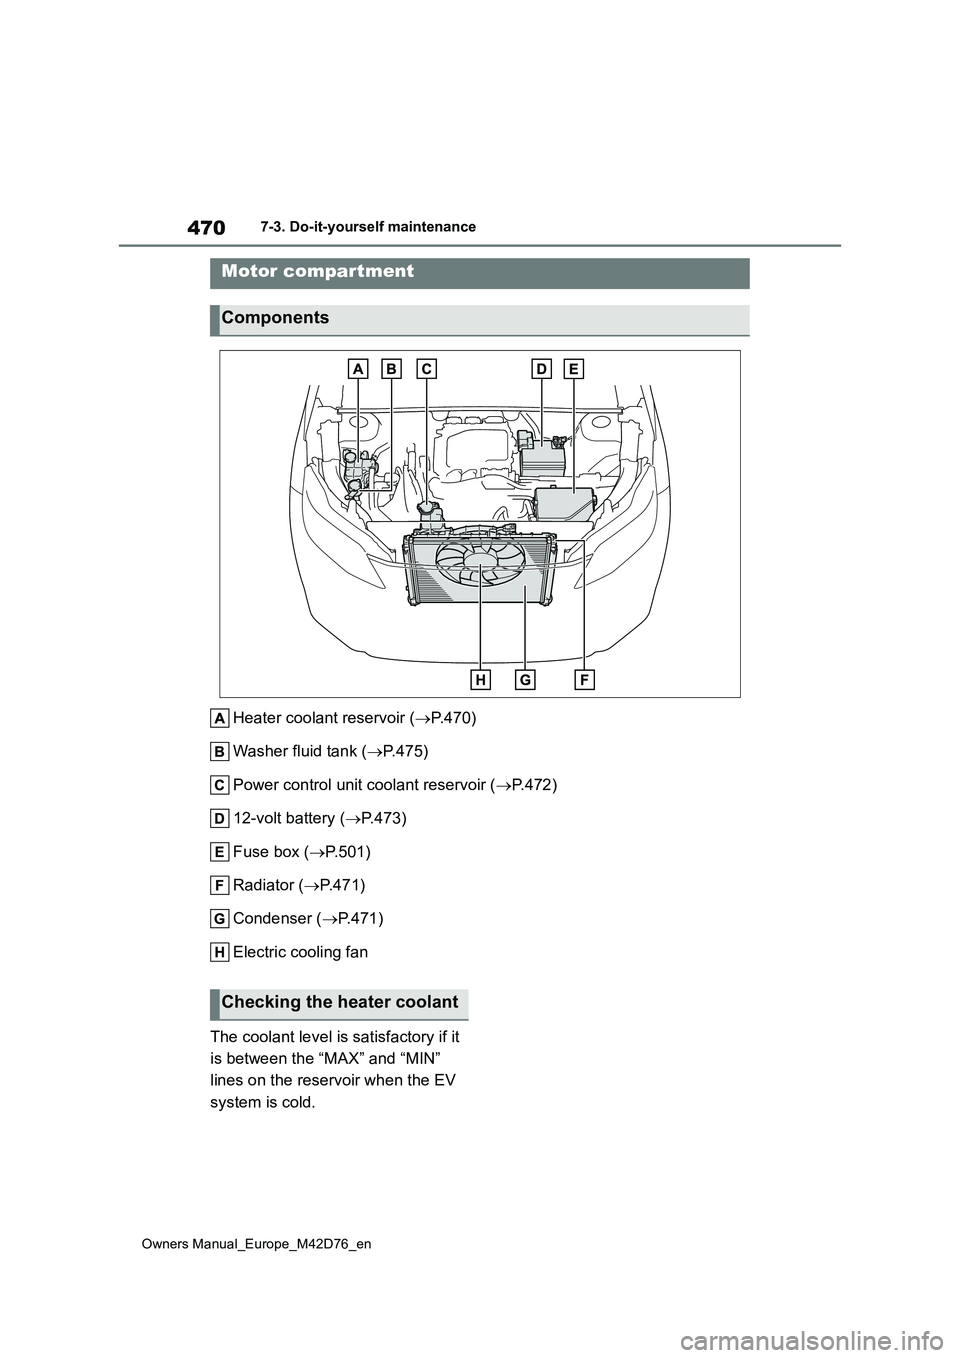 TOYOTA BZ4X 2022  Owners Manual (in English) 470
Owners Manual_Europe_M42D76_en
7-3. Do-it-yourself maintenance
Heater coolant reservoir (P.470) 
Washer fluid tank ( P.475) 
Power control unit coolant reservoir ( P.472) 
12-volt battery